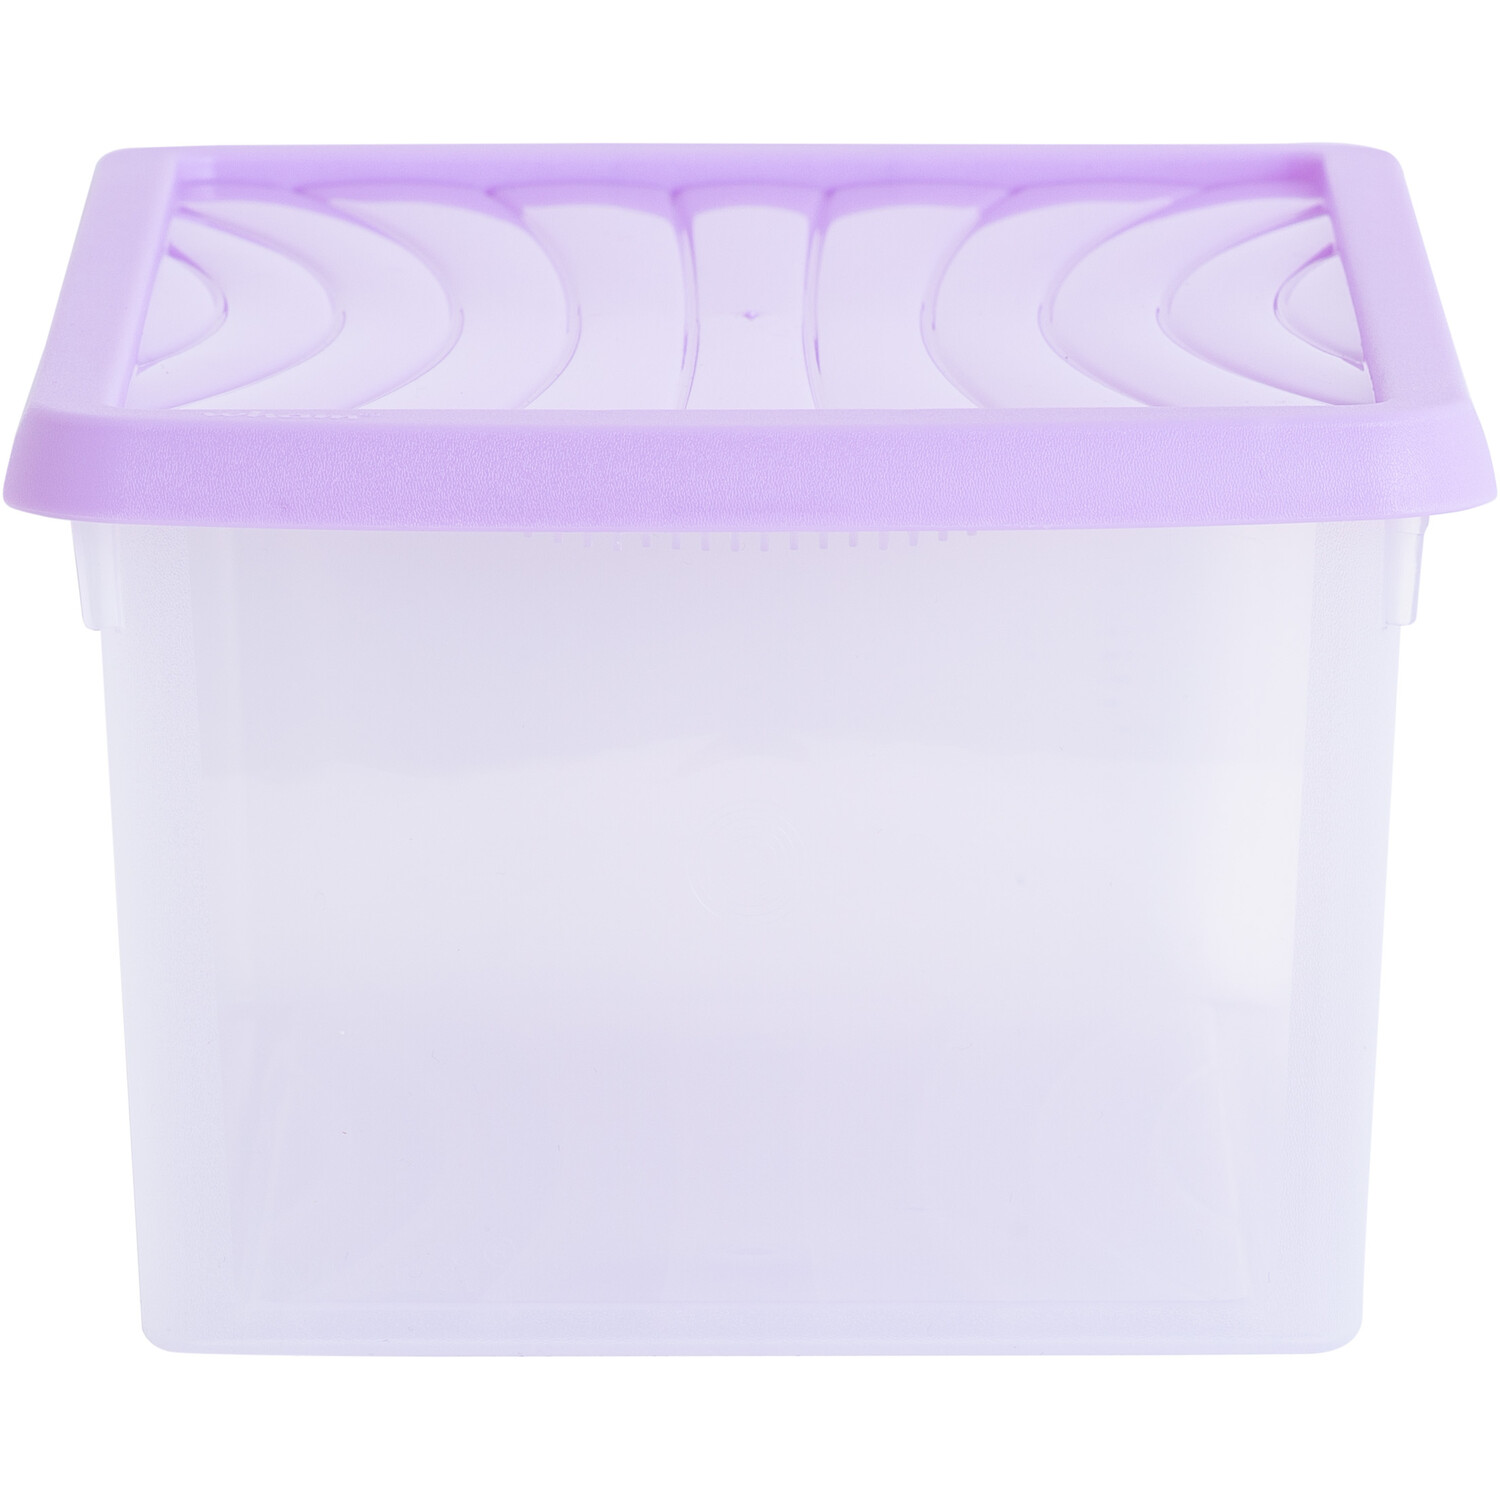 Single 9L Storage Box with Clip On Lid in Assorted styles Image 2